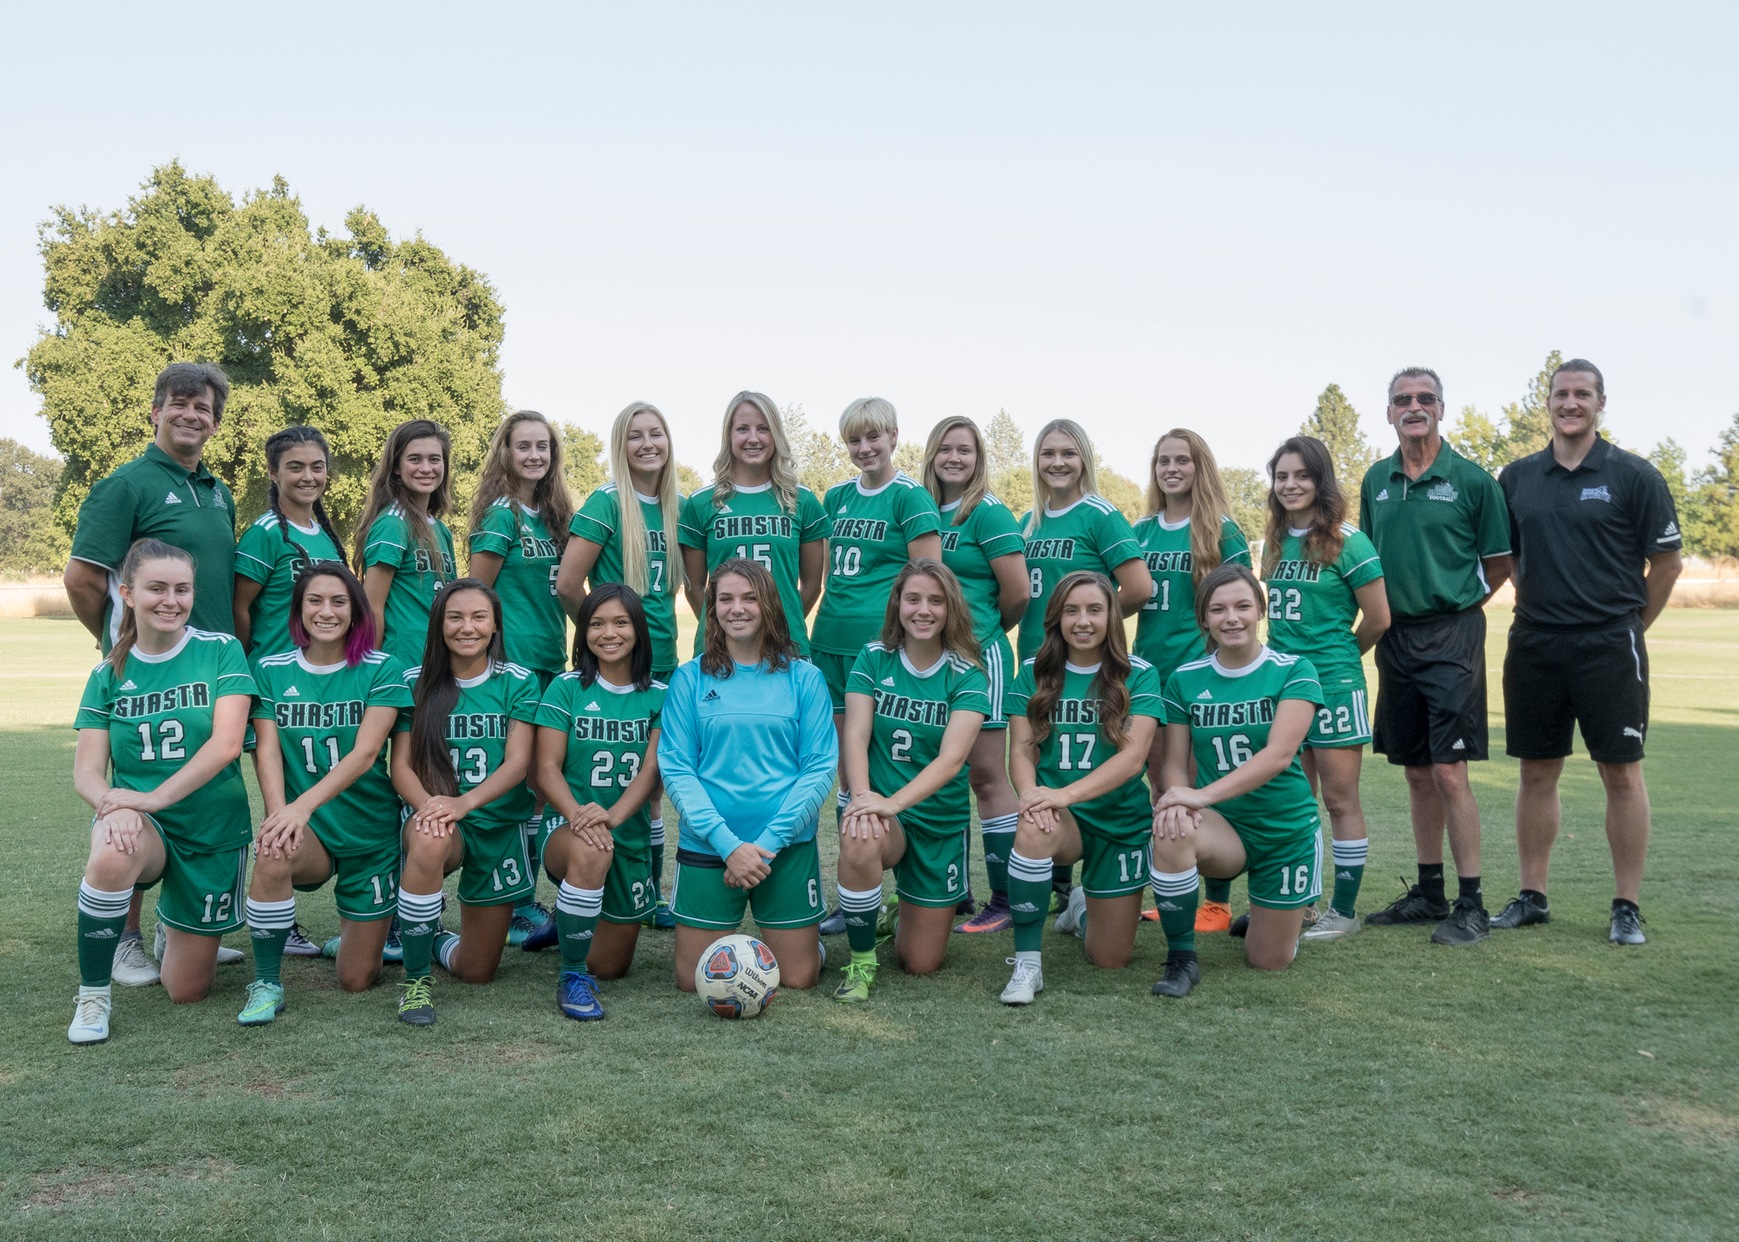 SHASTA COLLEGE STARTS THE YEAR WITH 5-1 WIN OVER SACRAMENTO